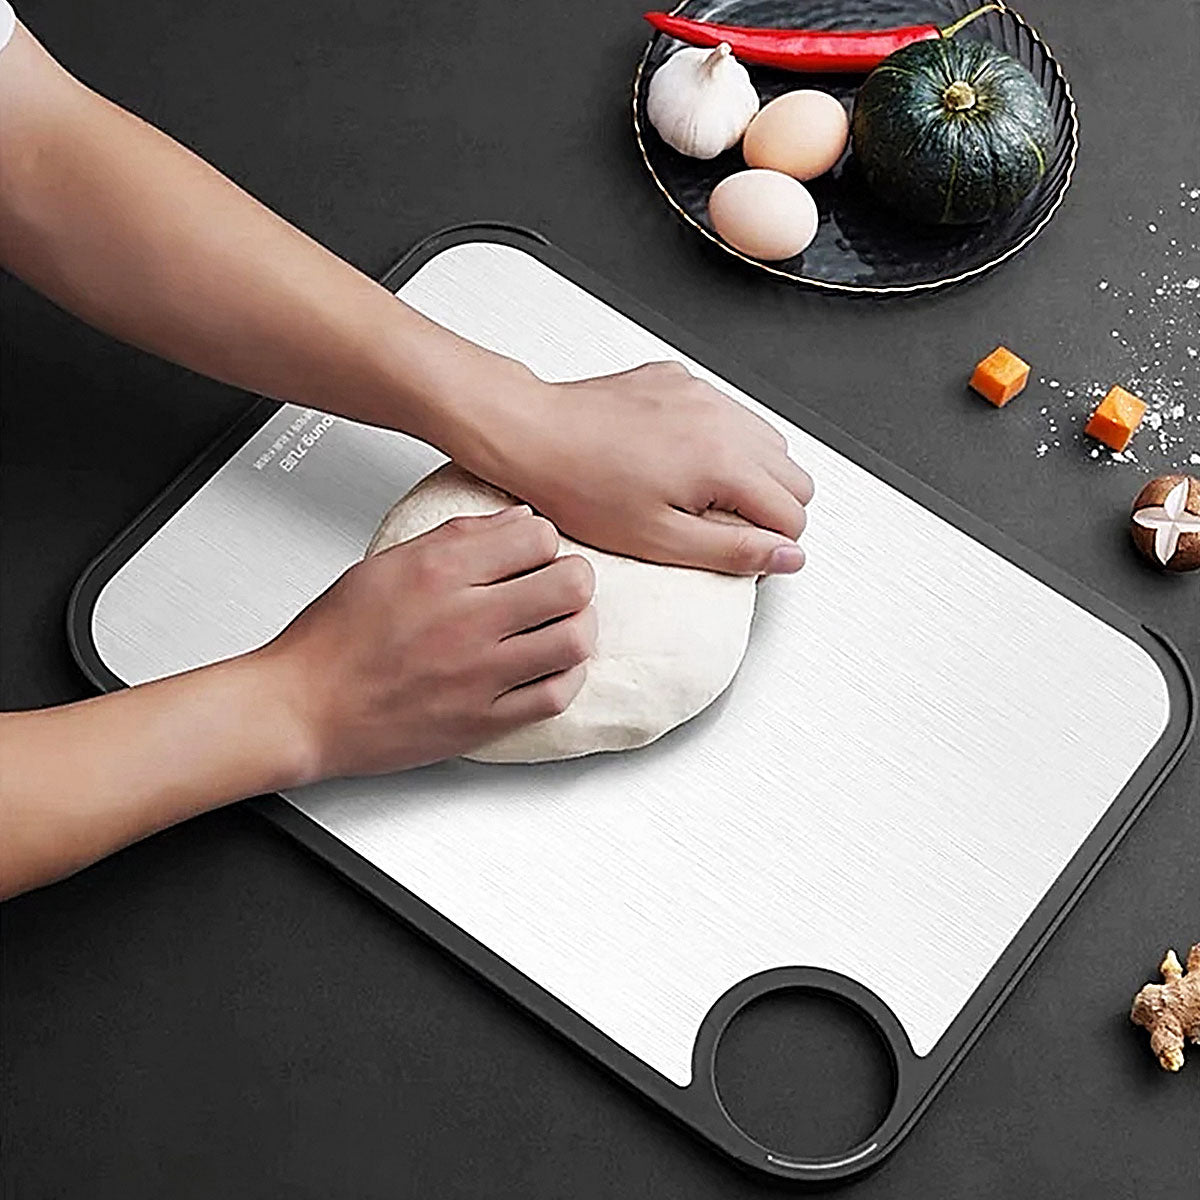 Joyoung IH Induction Pressure Cooker - Even Heating+Free Antibacterial Chopping Board